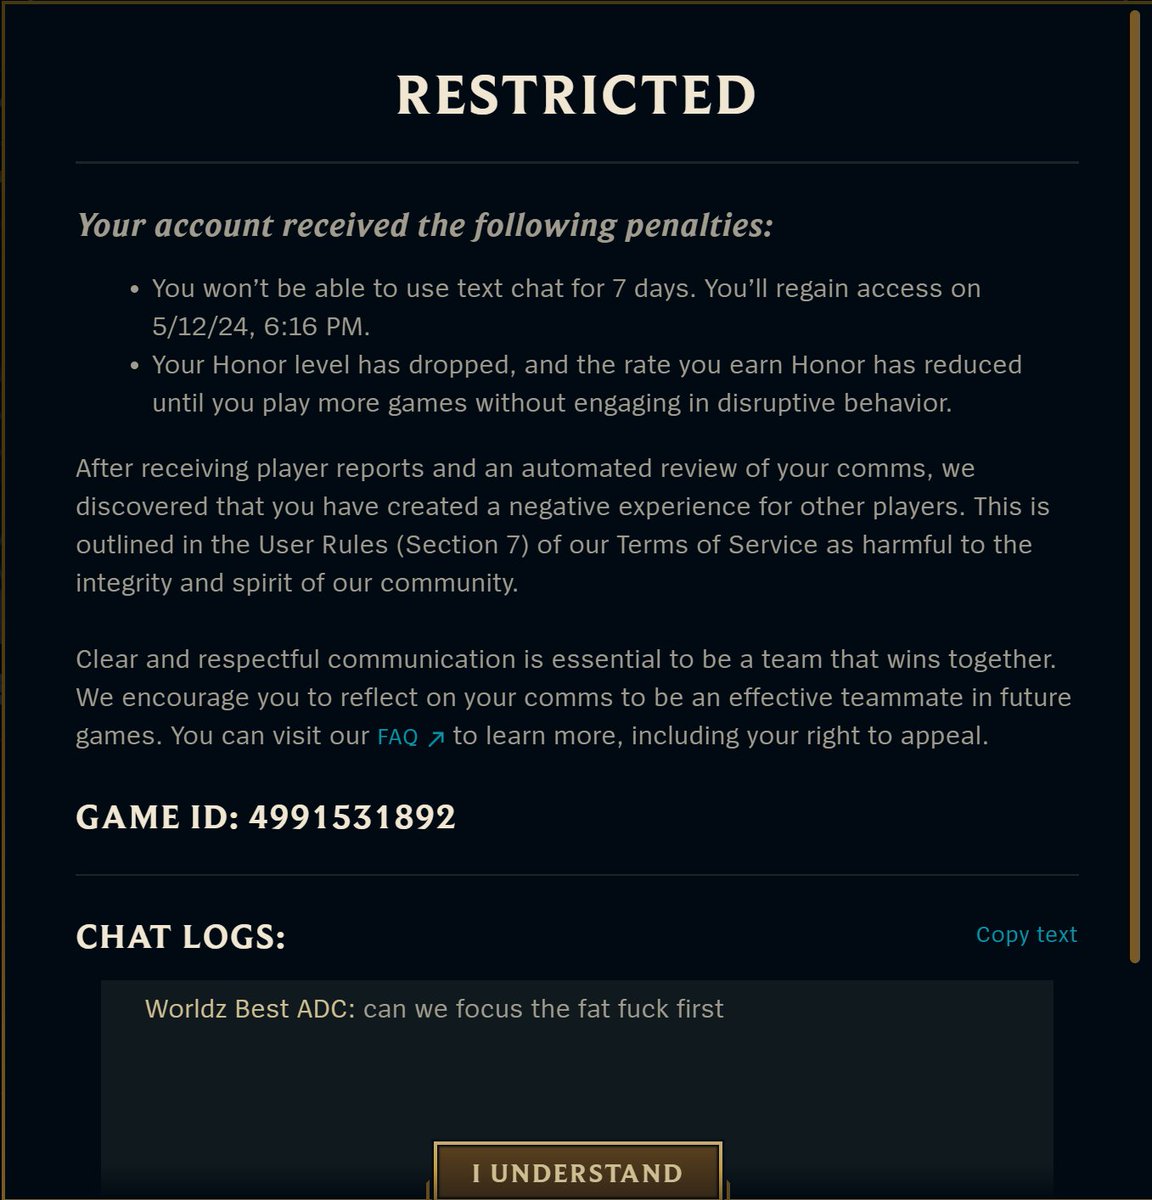 No way this is real. @riotgames @RiotPhreak @RiotSupport @RiotAugust @loltyler1 @KarasMaii @doaenel @ScrubNoobLoL @Aatroxcarry @Trick2g  Can anyone please help me get this reversed?